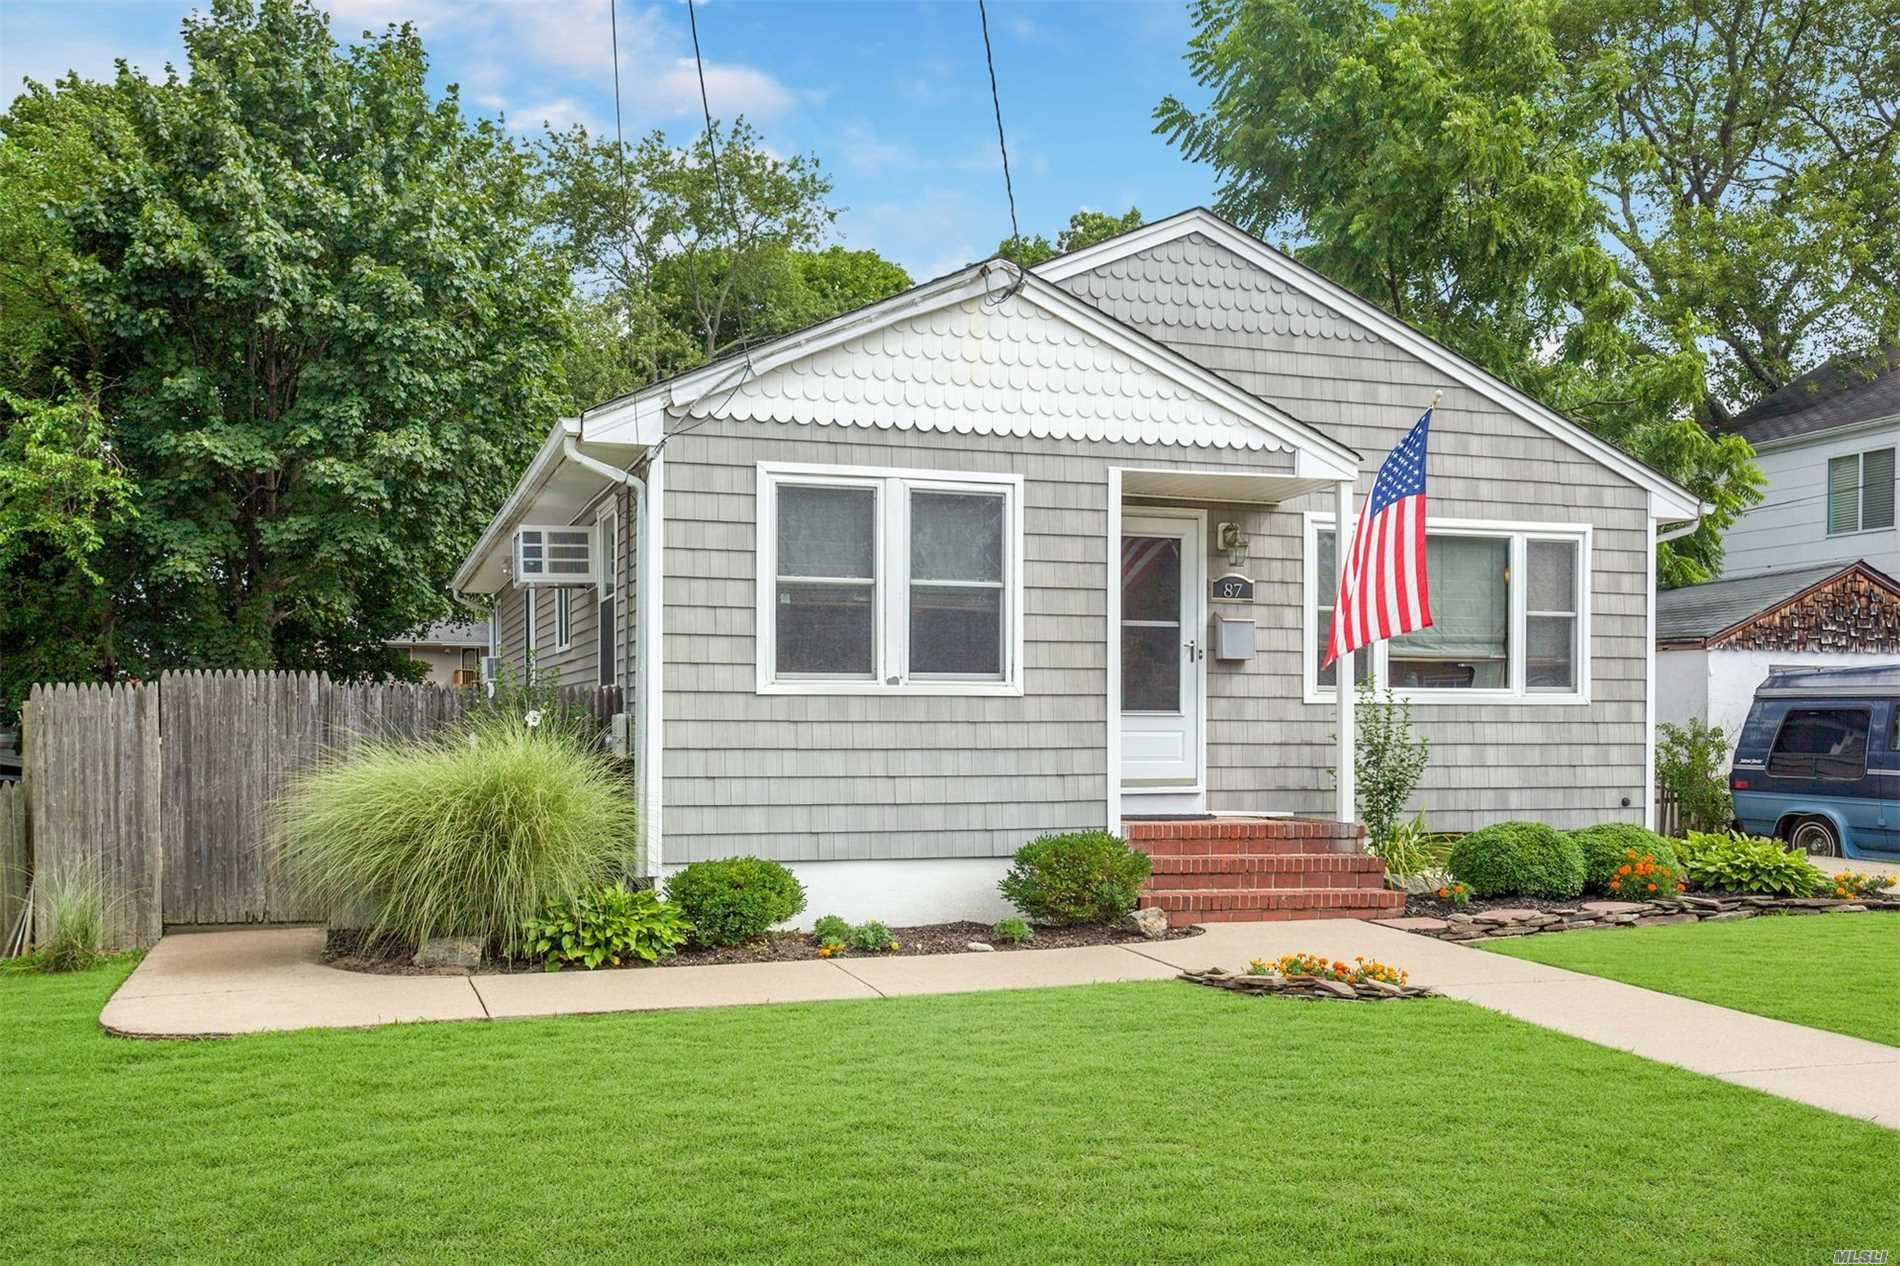 Beautifully Renovated Ranch In The Heart Of Islip Terrace. East Islip School District. Fully Finished Basement With Egress Windows. Brand New Roof, Too Much To List!